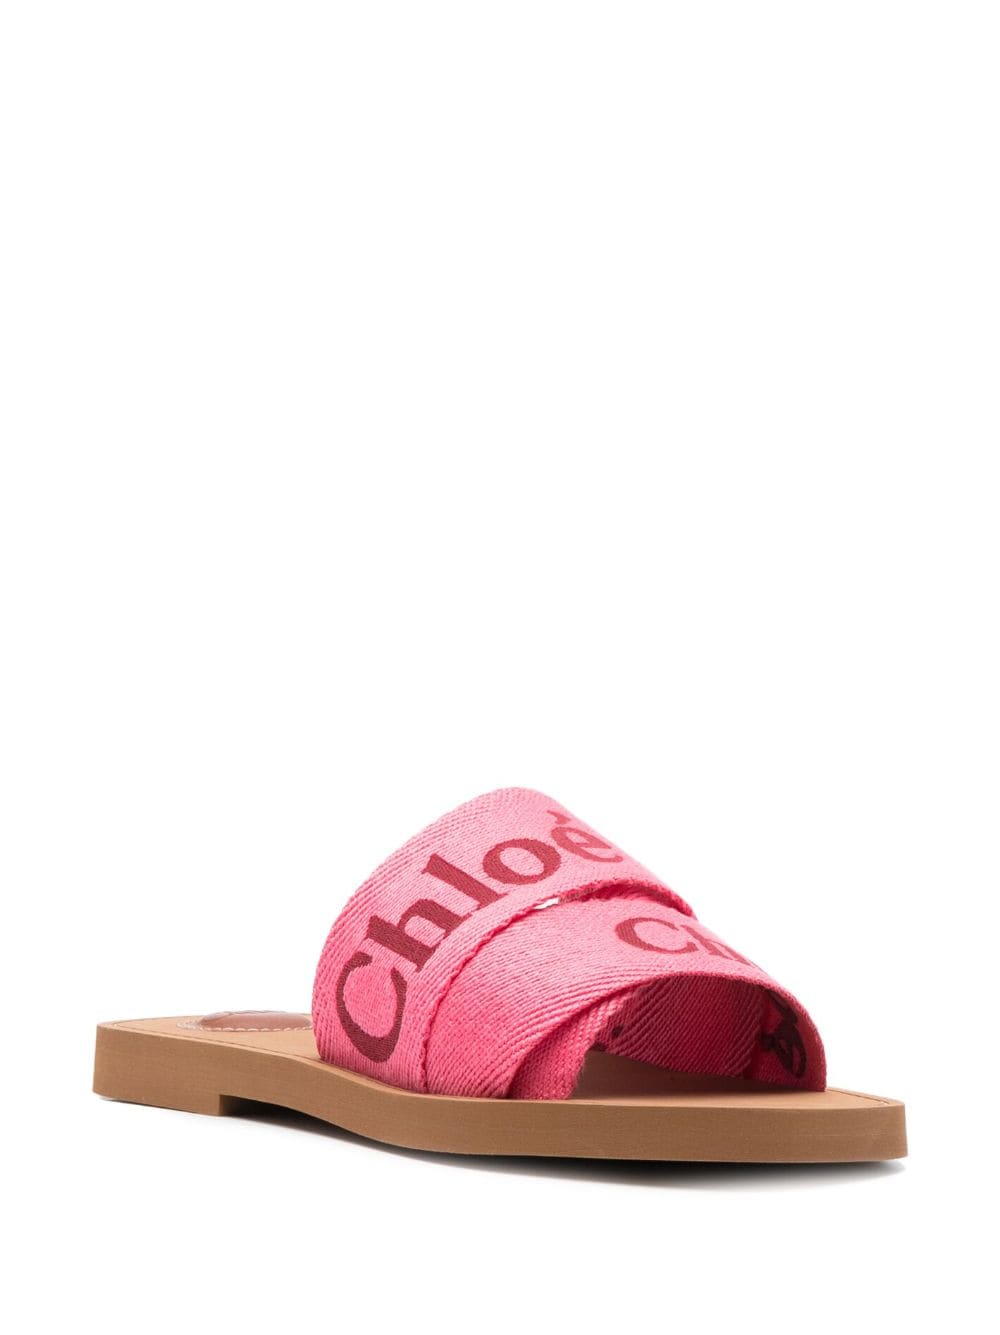 Chloé Woody slippers - 9R5 pink-red 1